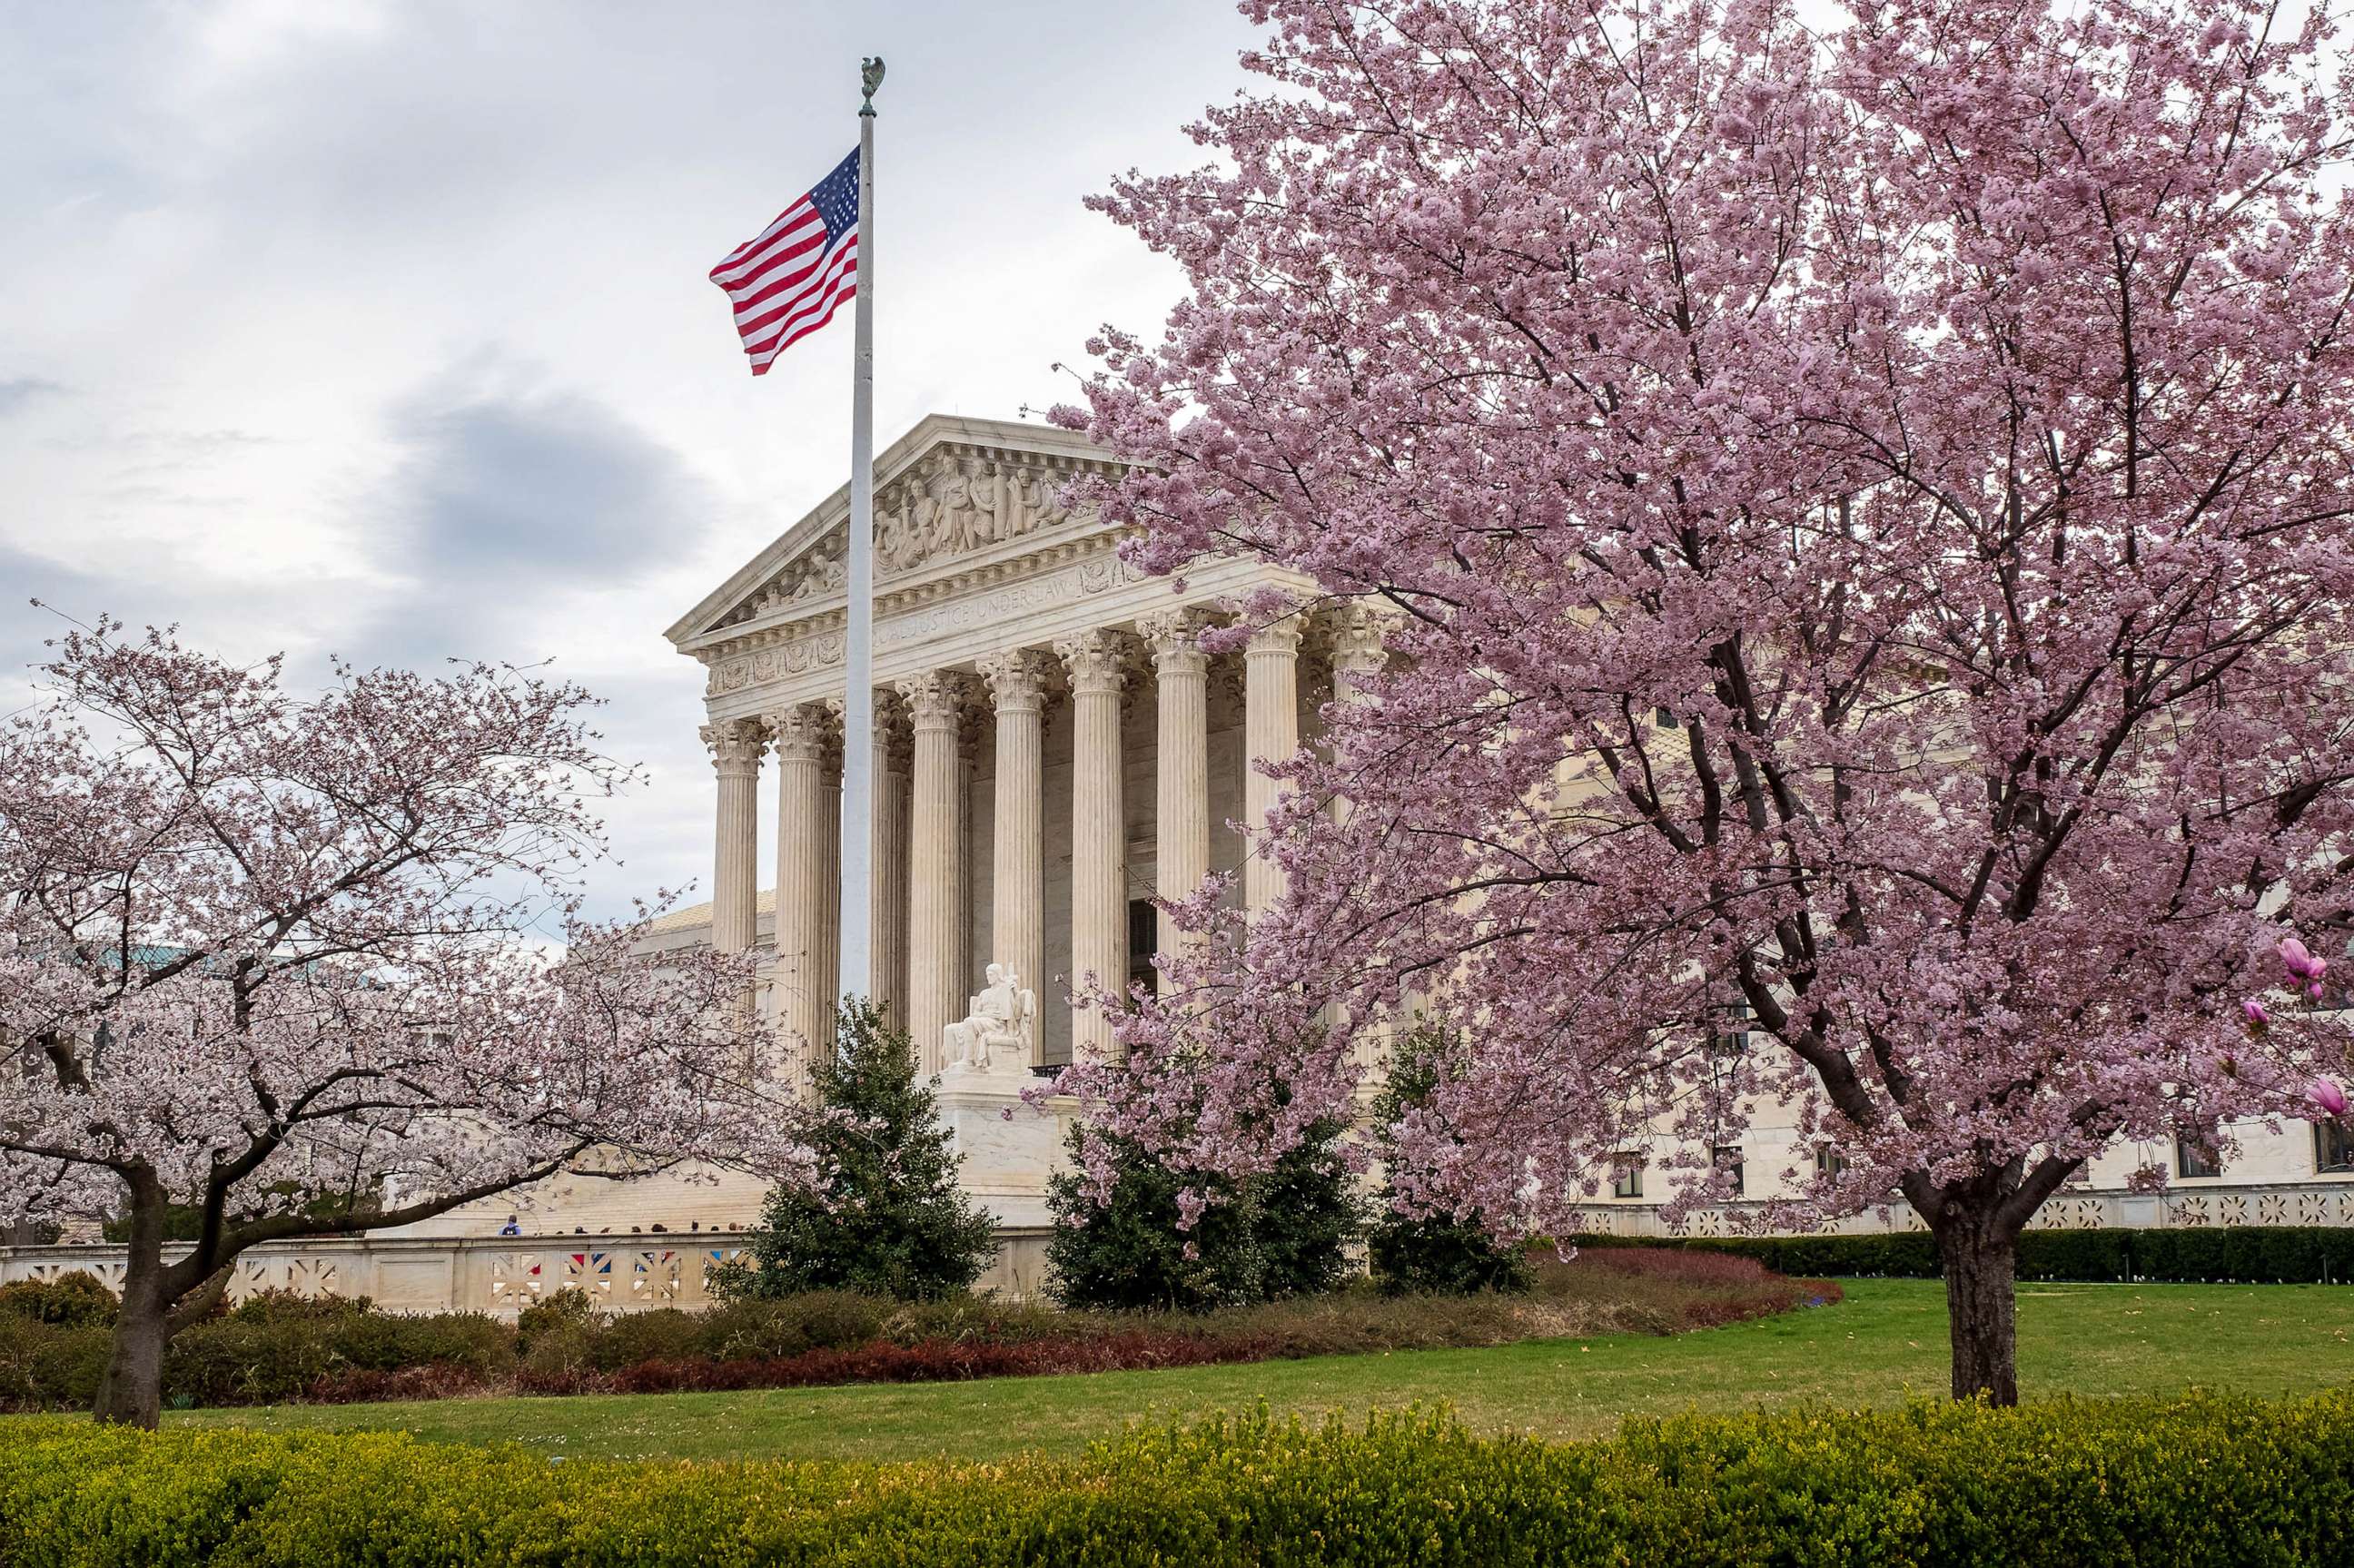 PHOTO: Cherry blossoms at the Supreme Court on a windy morning in Washington, D.C.